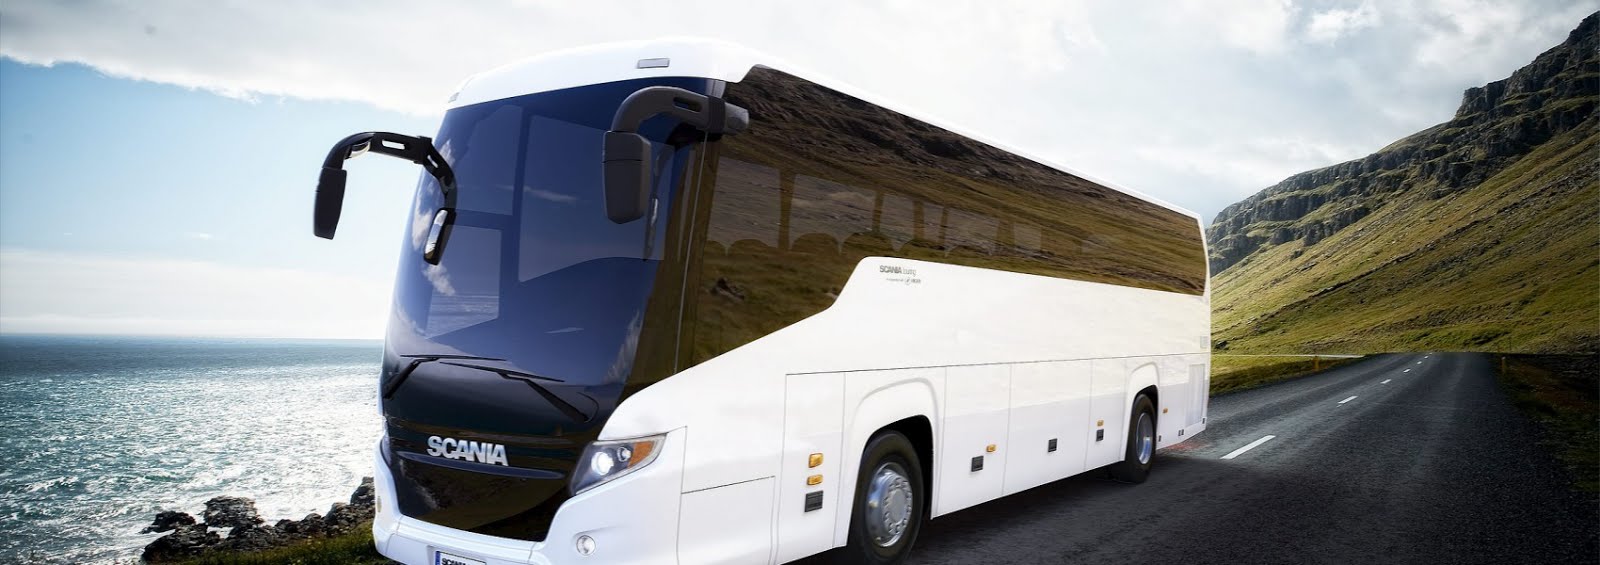 Affordable Bus and Coach Rental Service in Europe